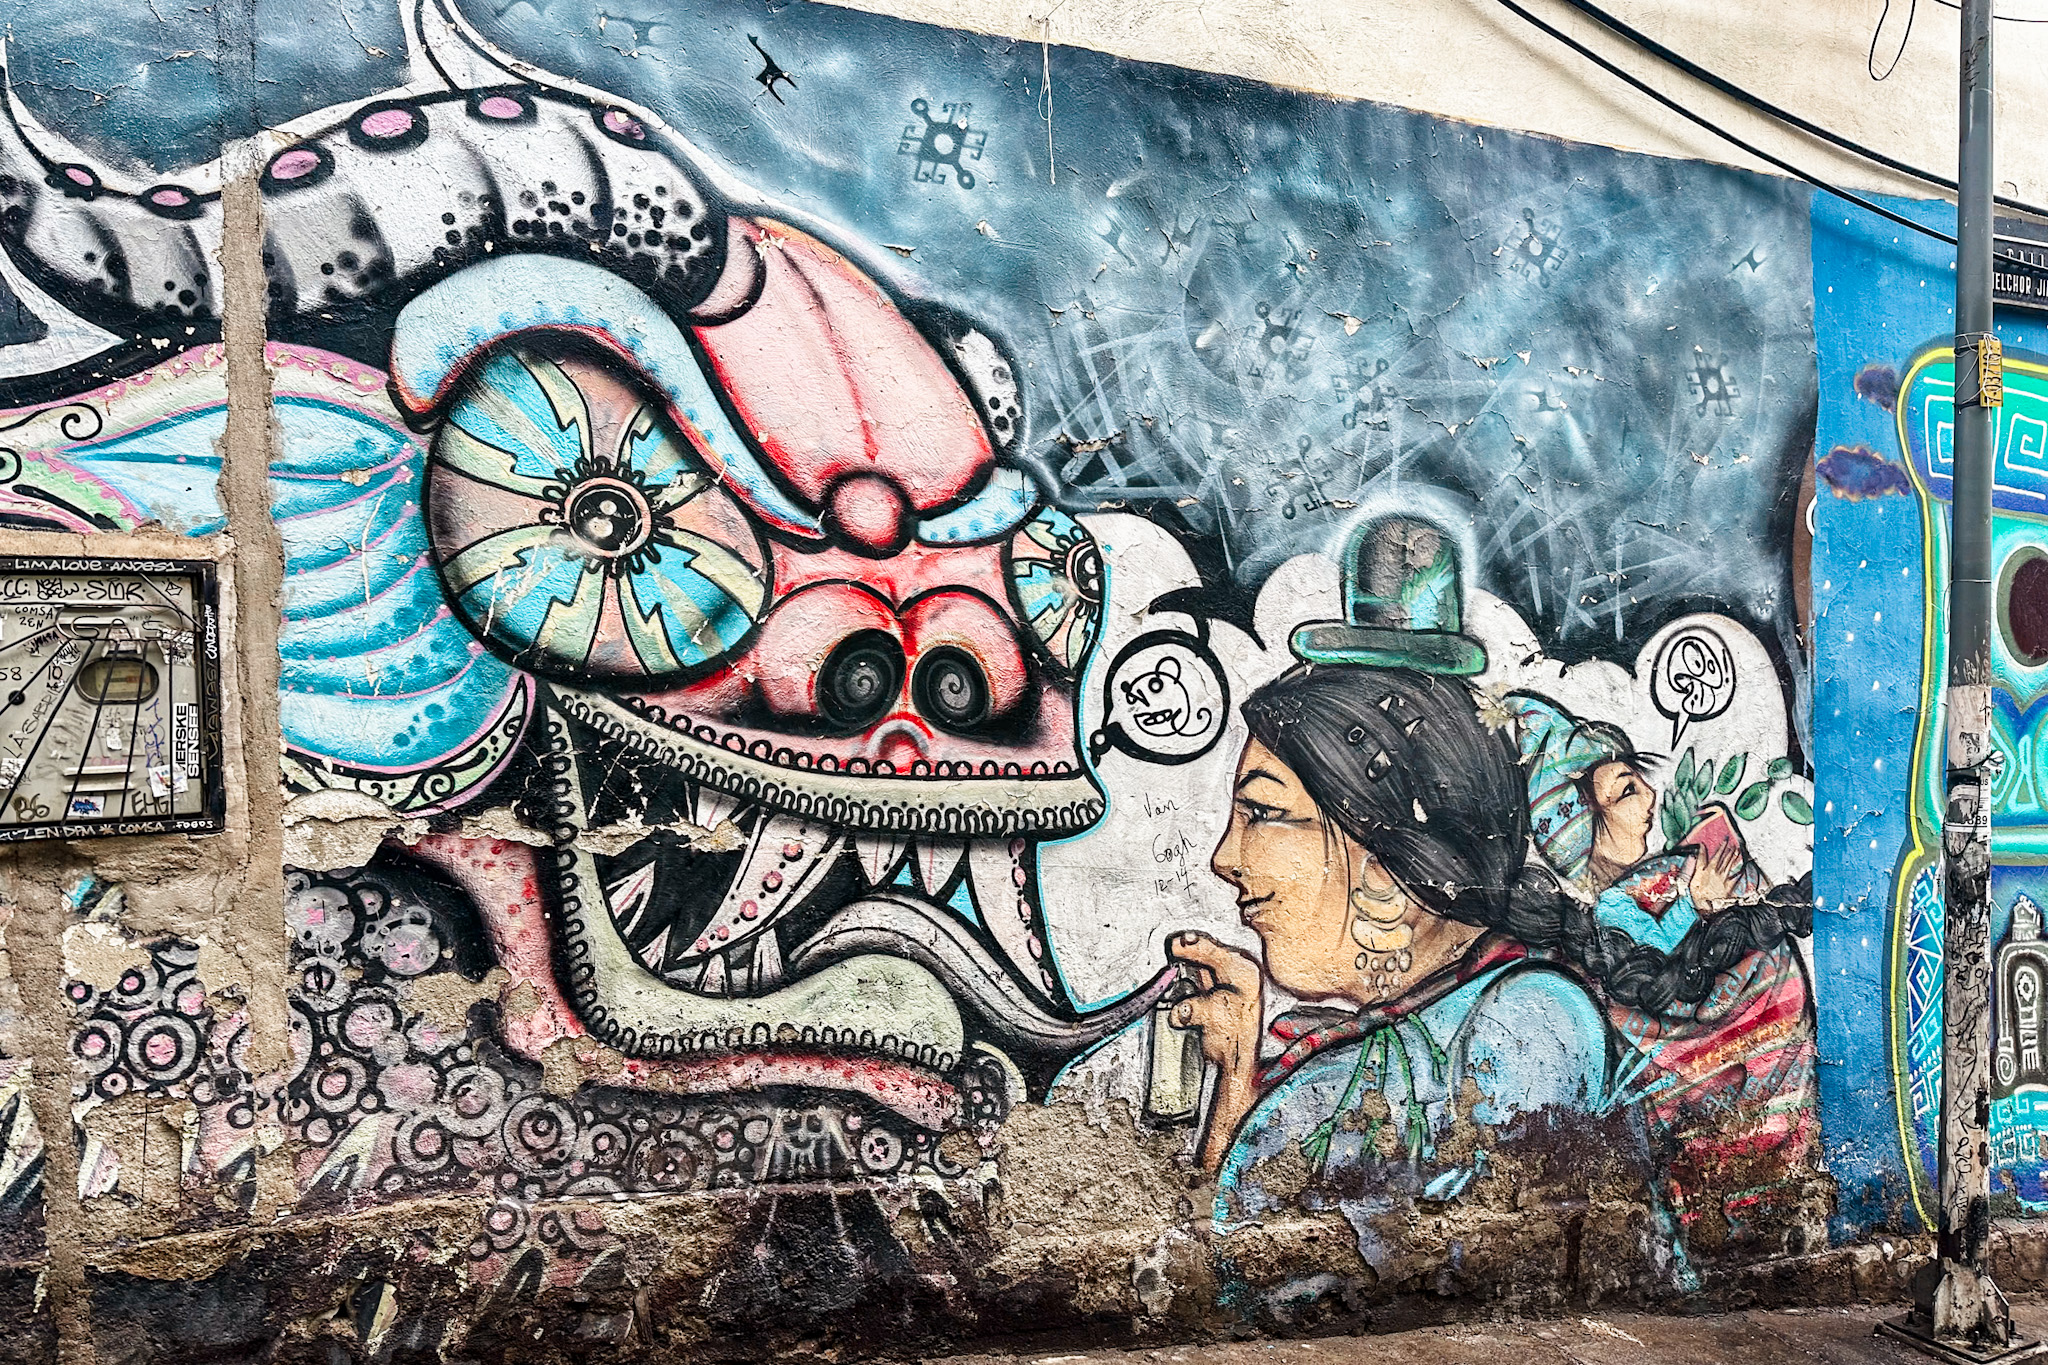 Things to do in La Paz, Bolivia: Admire street art